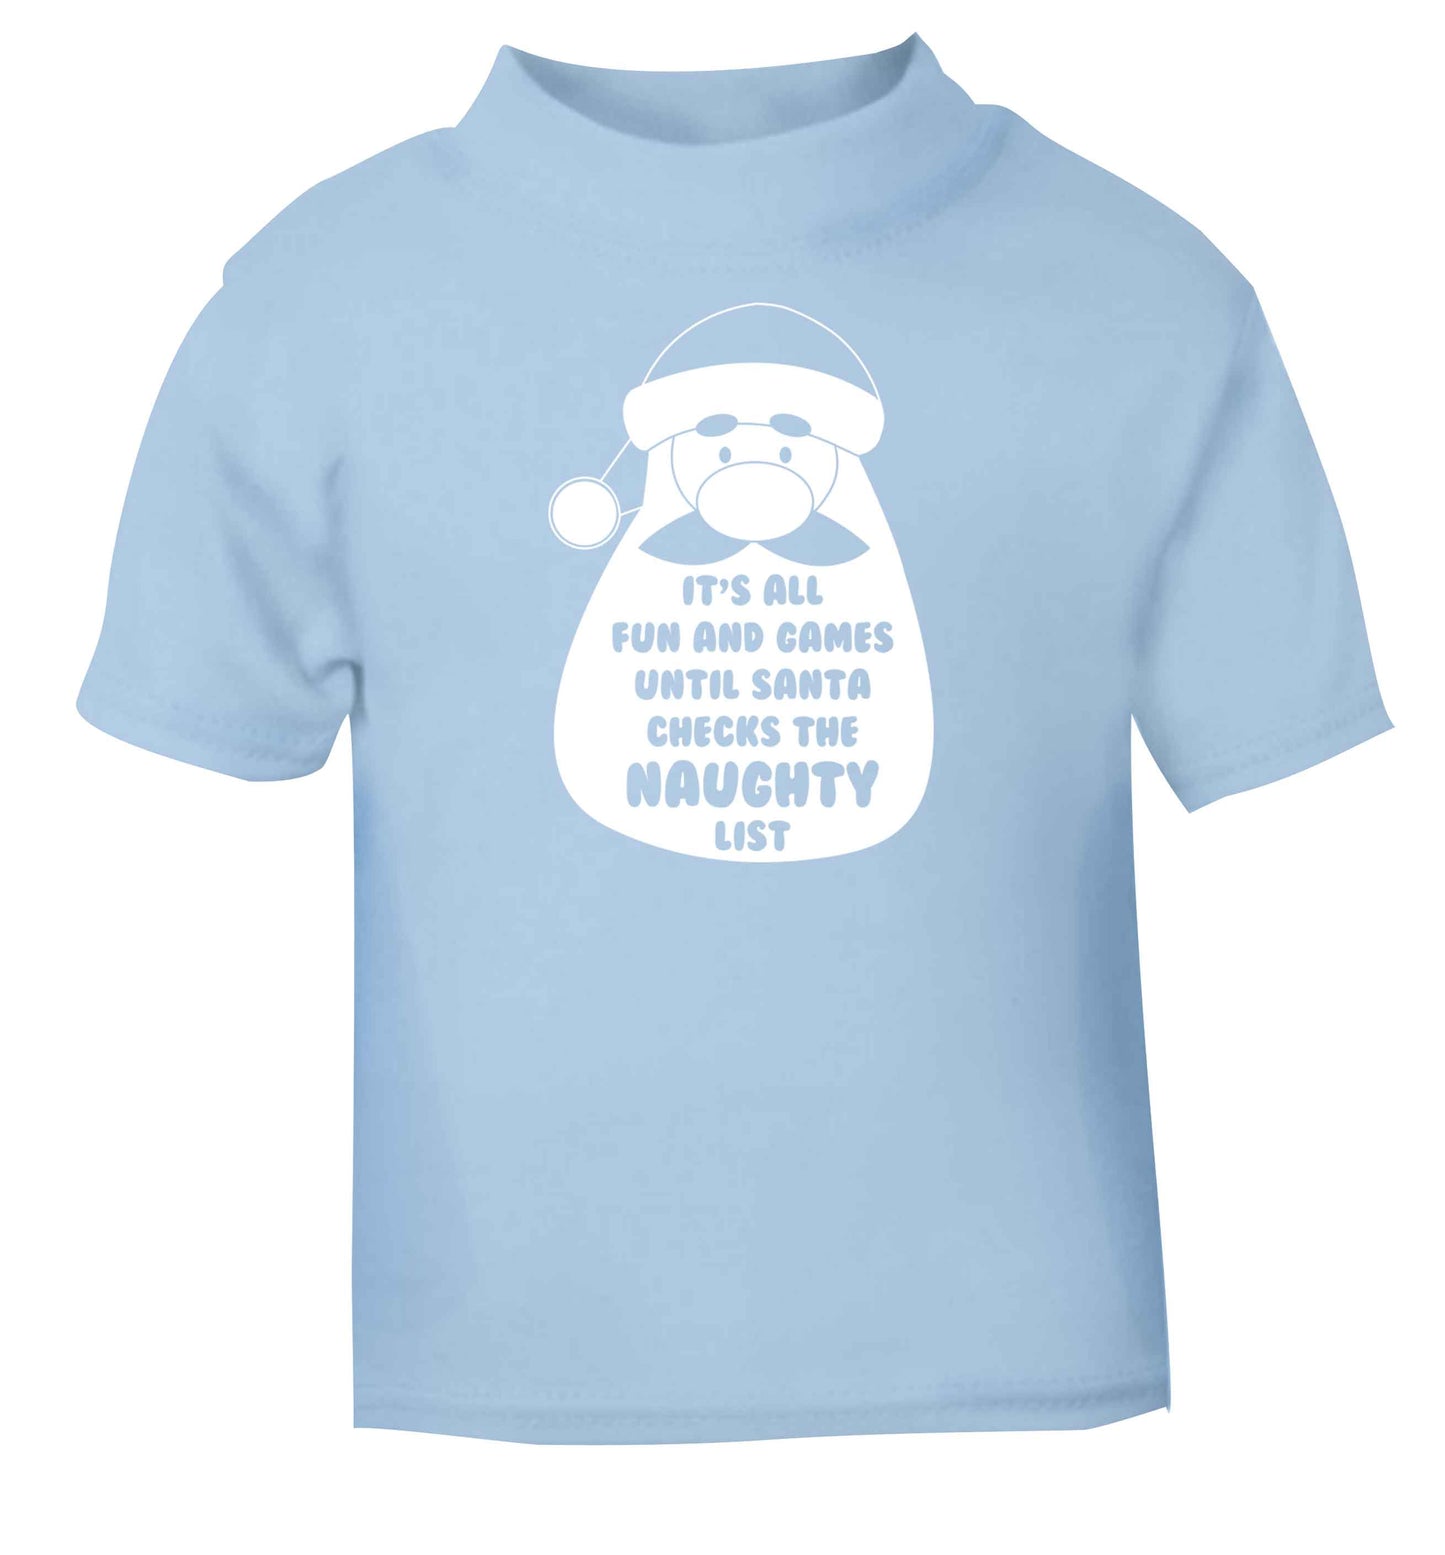 It's all fun and games until Santa checks the naughty list light blue baby toddler Tshirt 2 Years